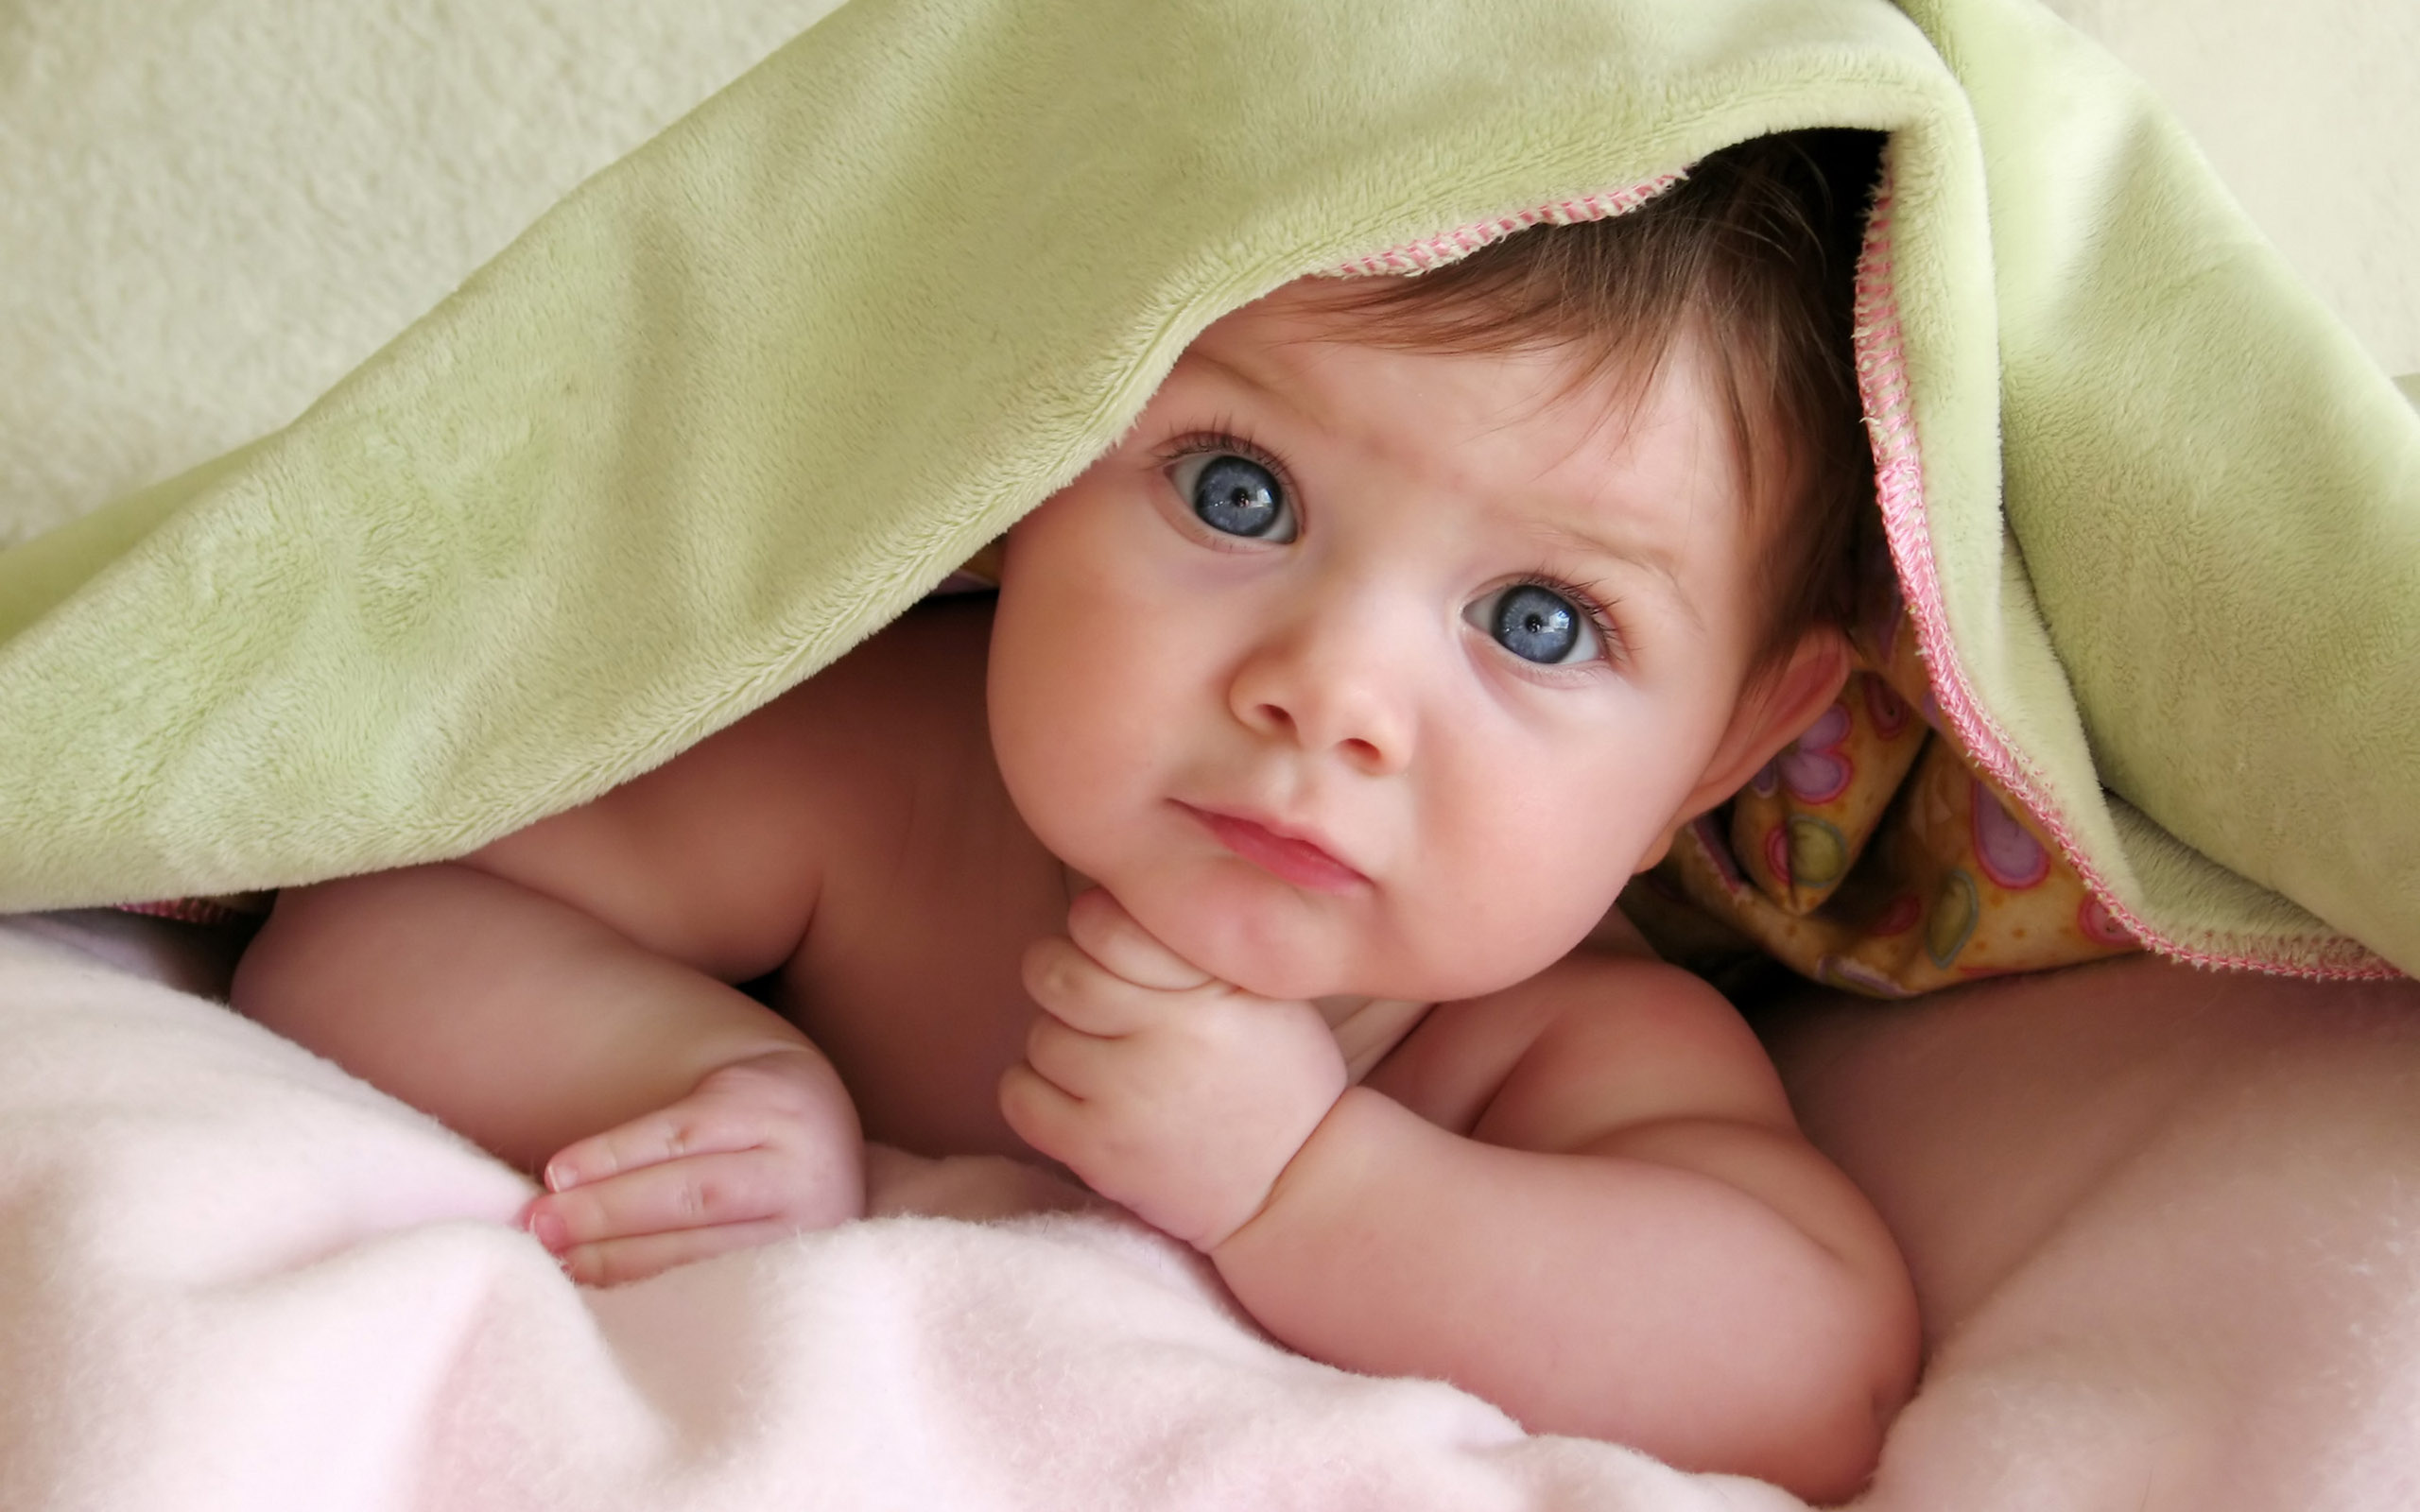 Establishing a bedtime routine with your baby